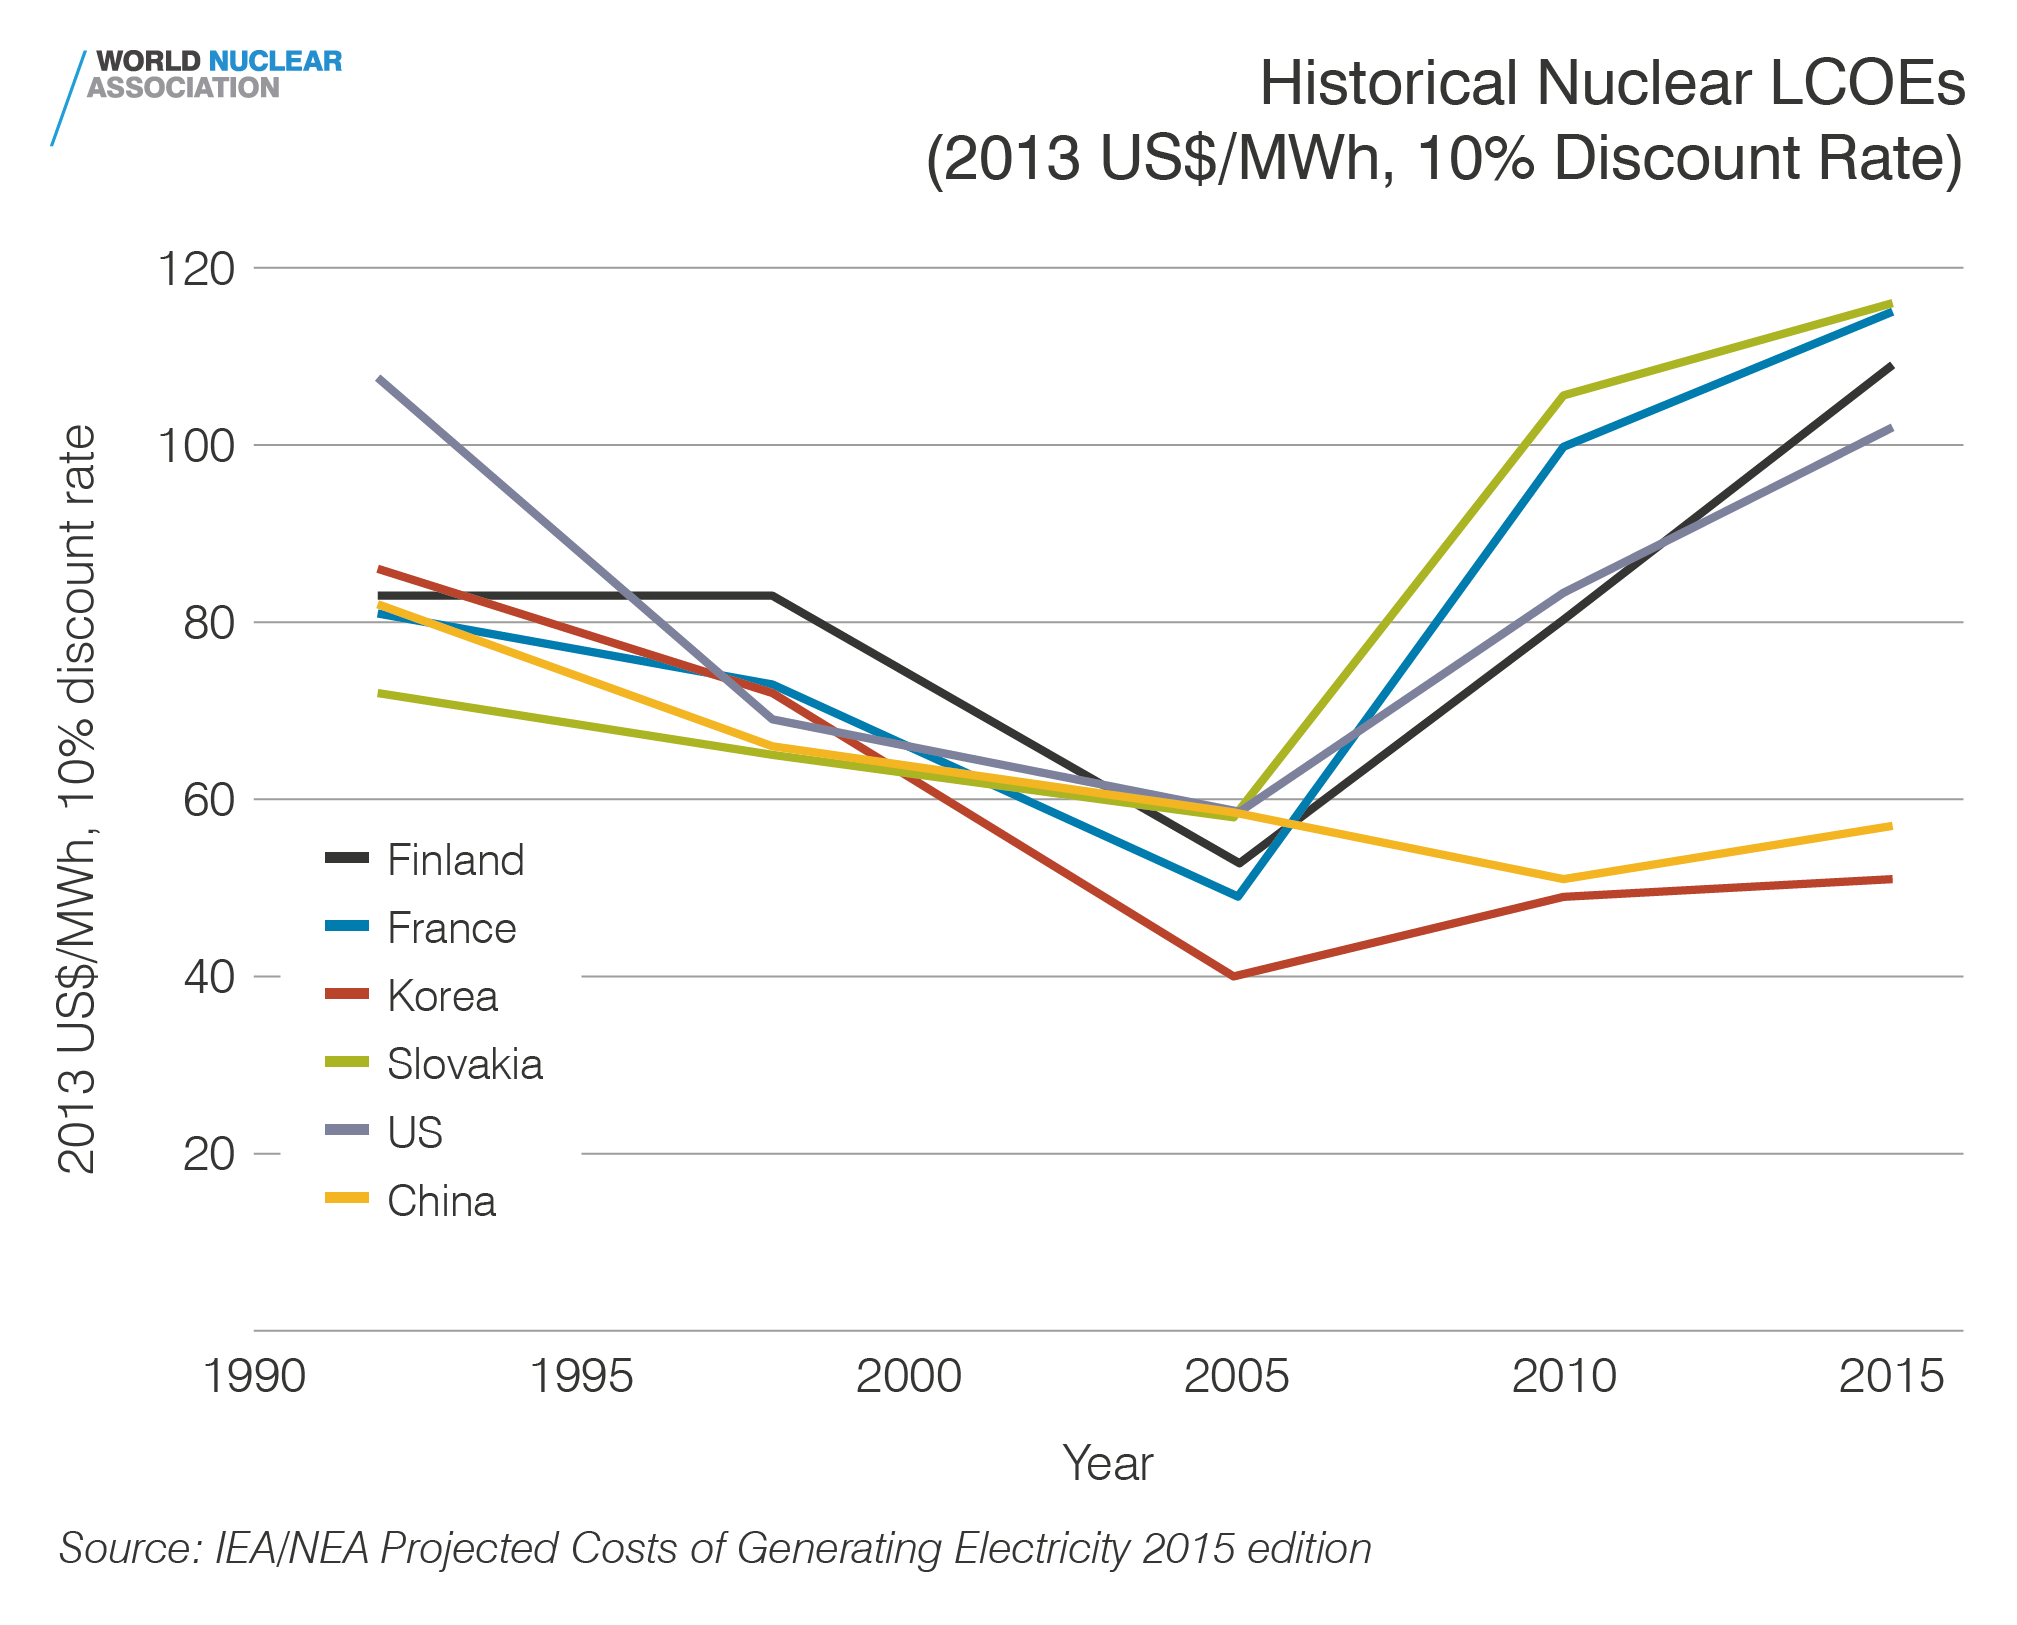 Historical Nuclear LCOEs (2013US$/MWh, 10% discount rate)